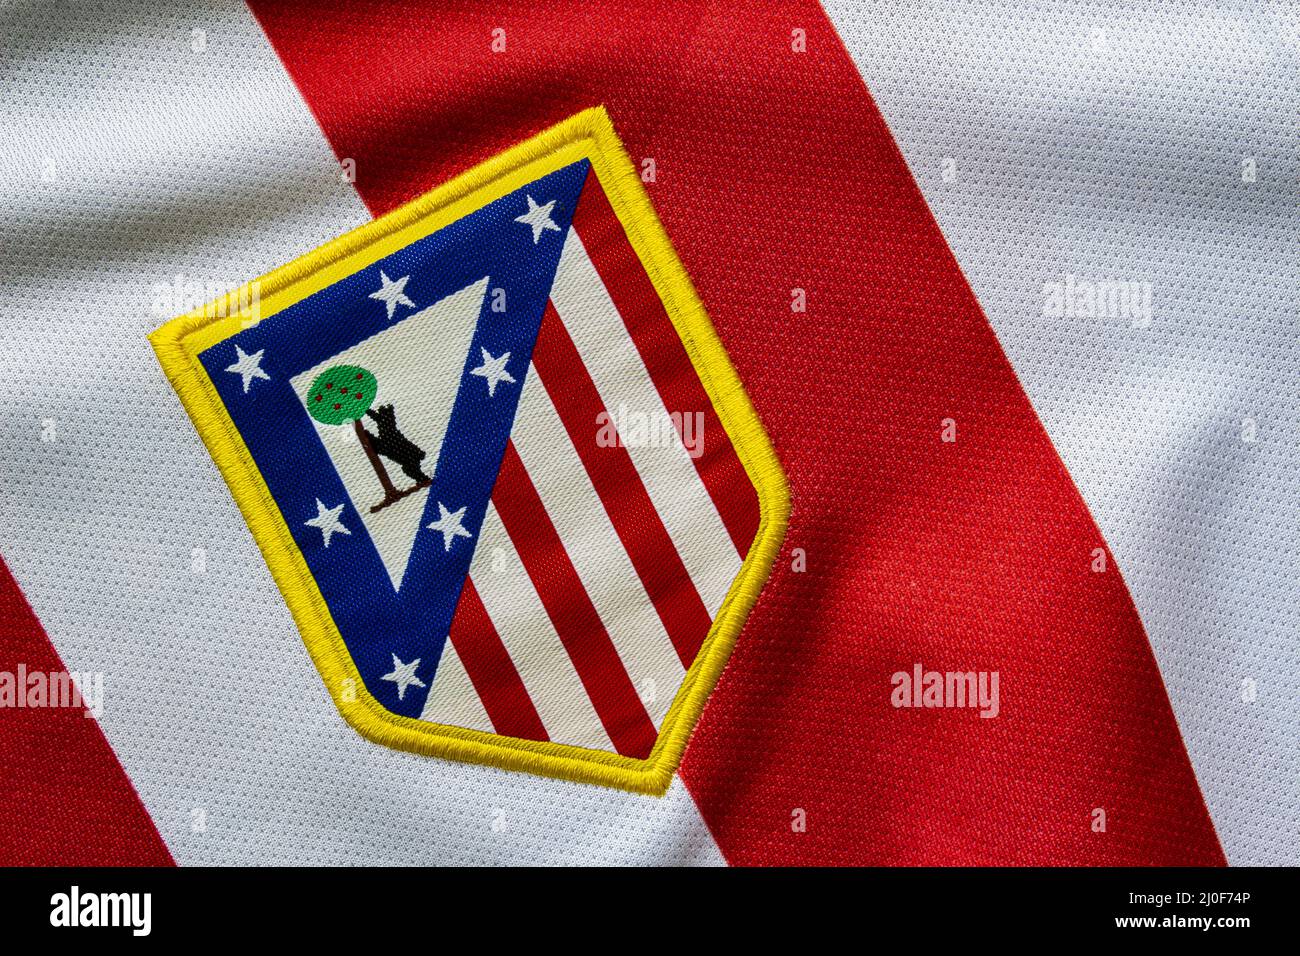 Atletico madrid logo hi-res stock photography and images - Alamy